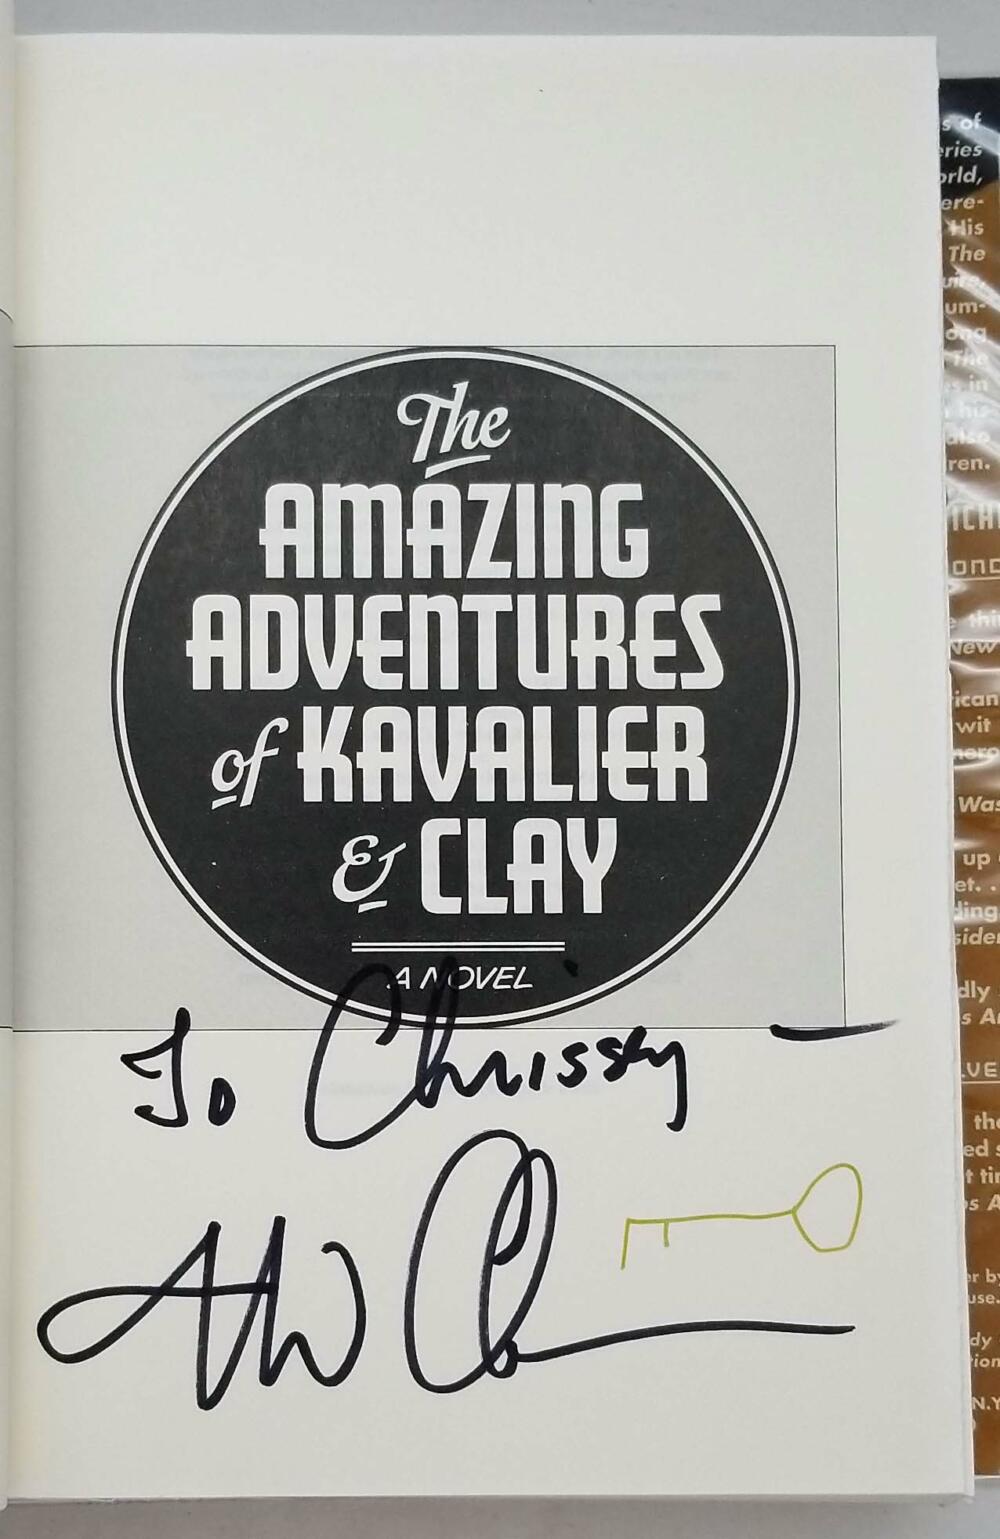 The Amazing Adventures of Kavalier & Clay - Michael Chabon 2000 SIGNED